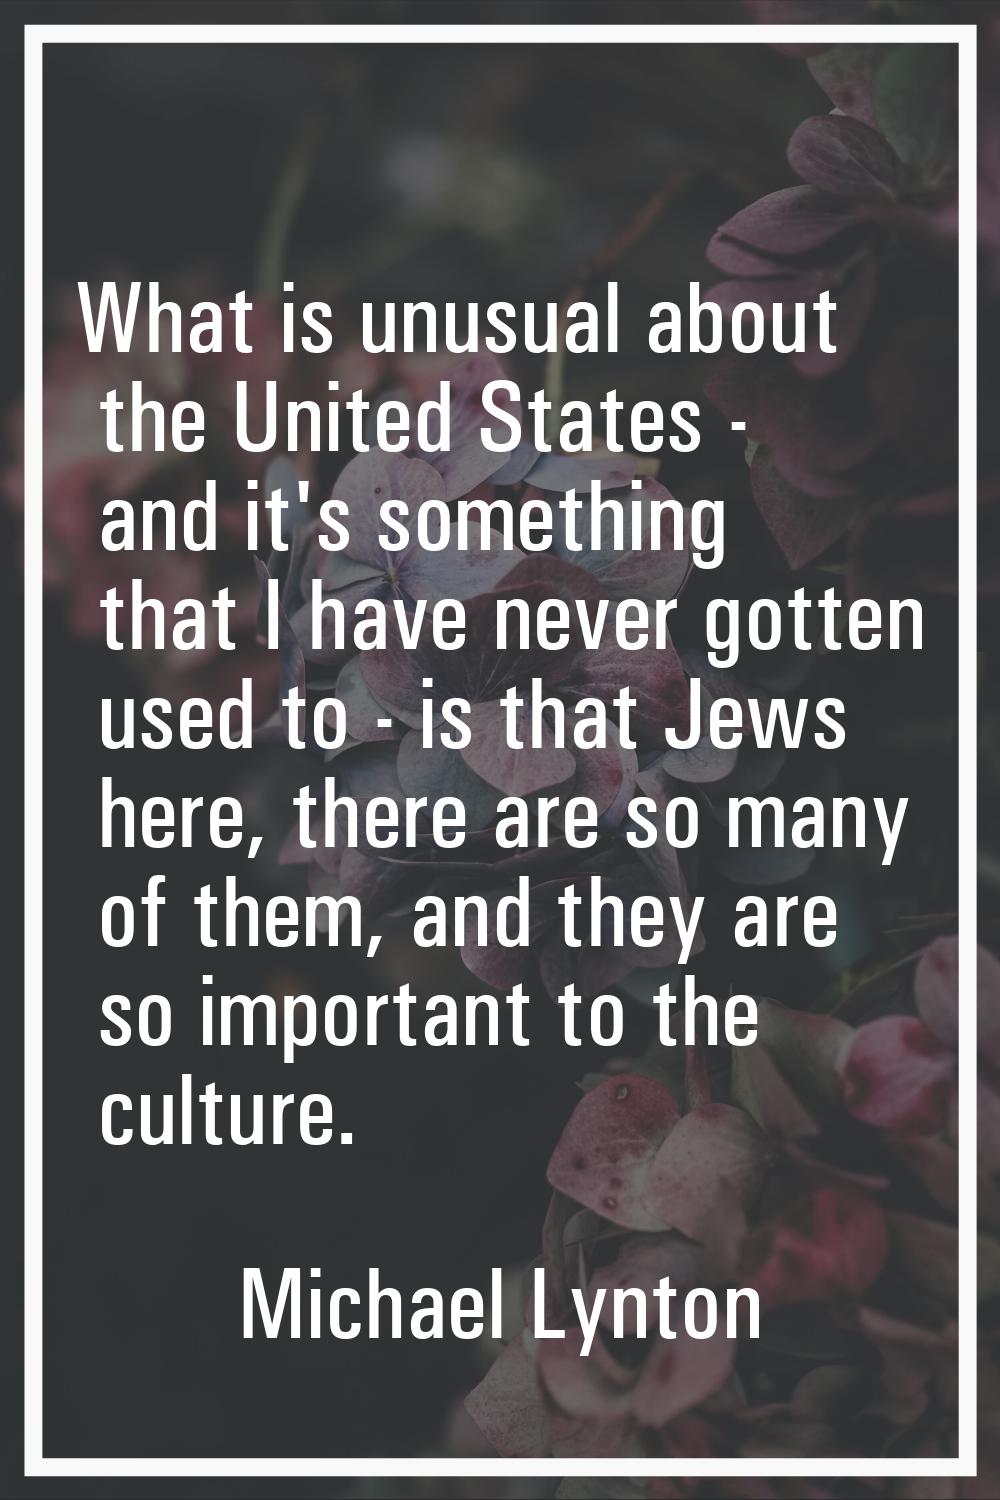 What is unusual about the United States - and it's something that I have never gotten used to - is 